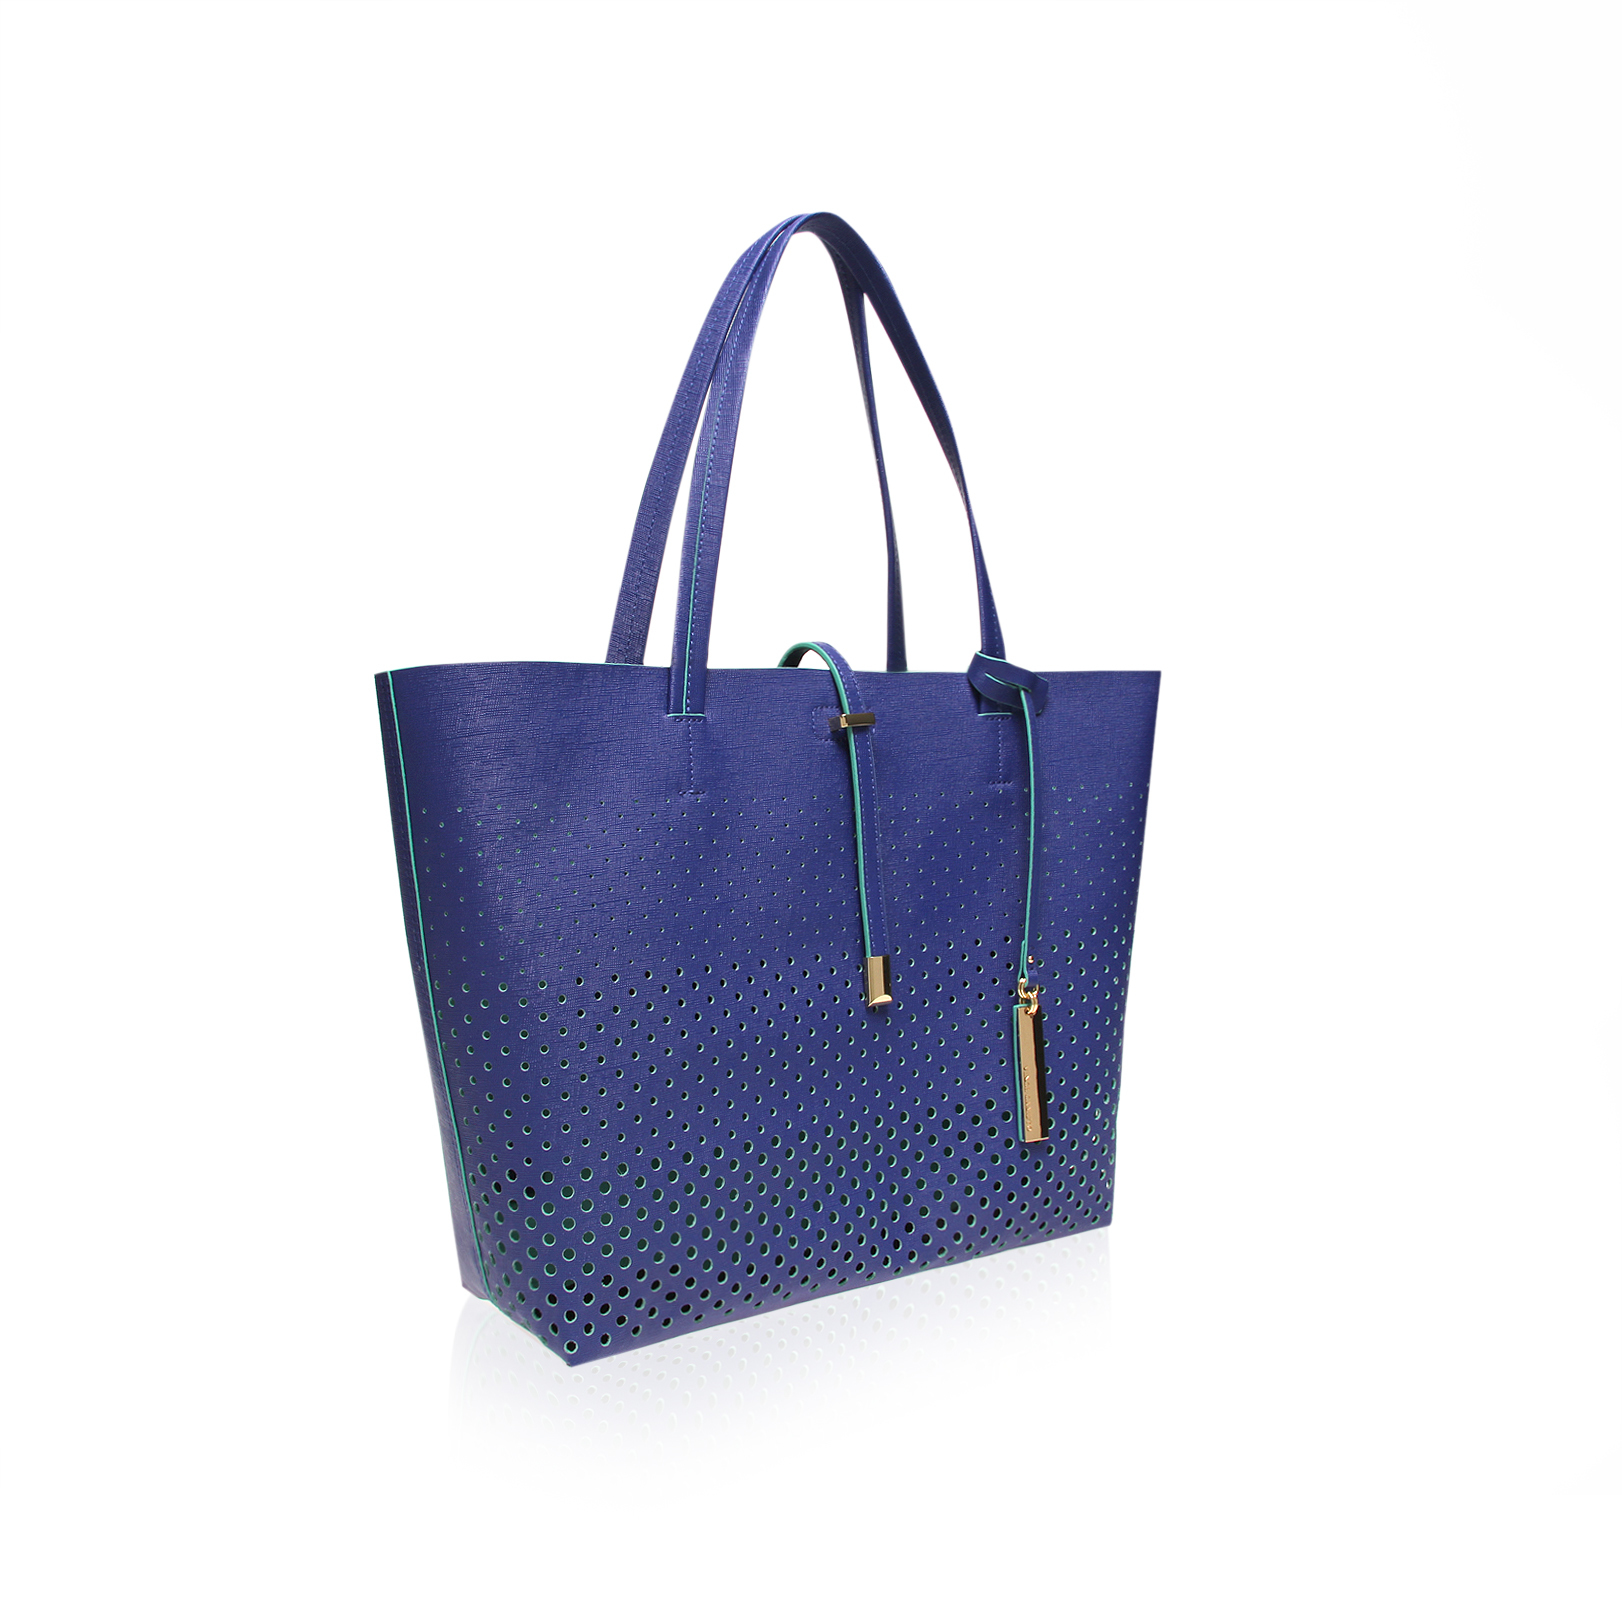 Vince Camuto | LEILA TOTE Blue Tote Bag by VINCE CAMUTO